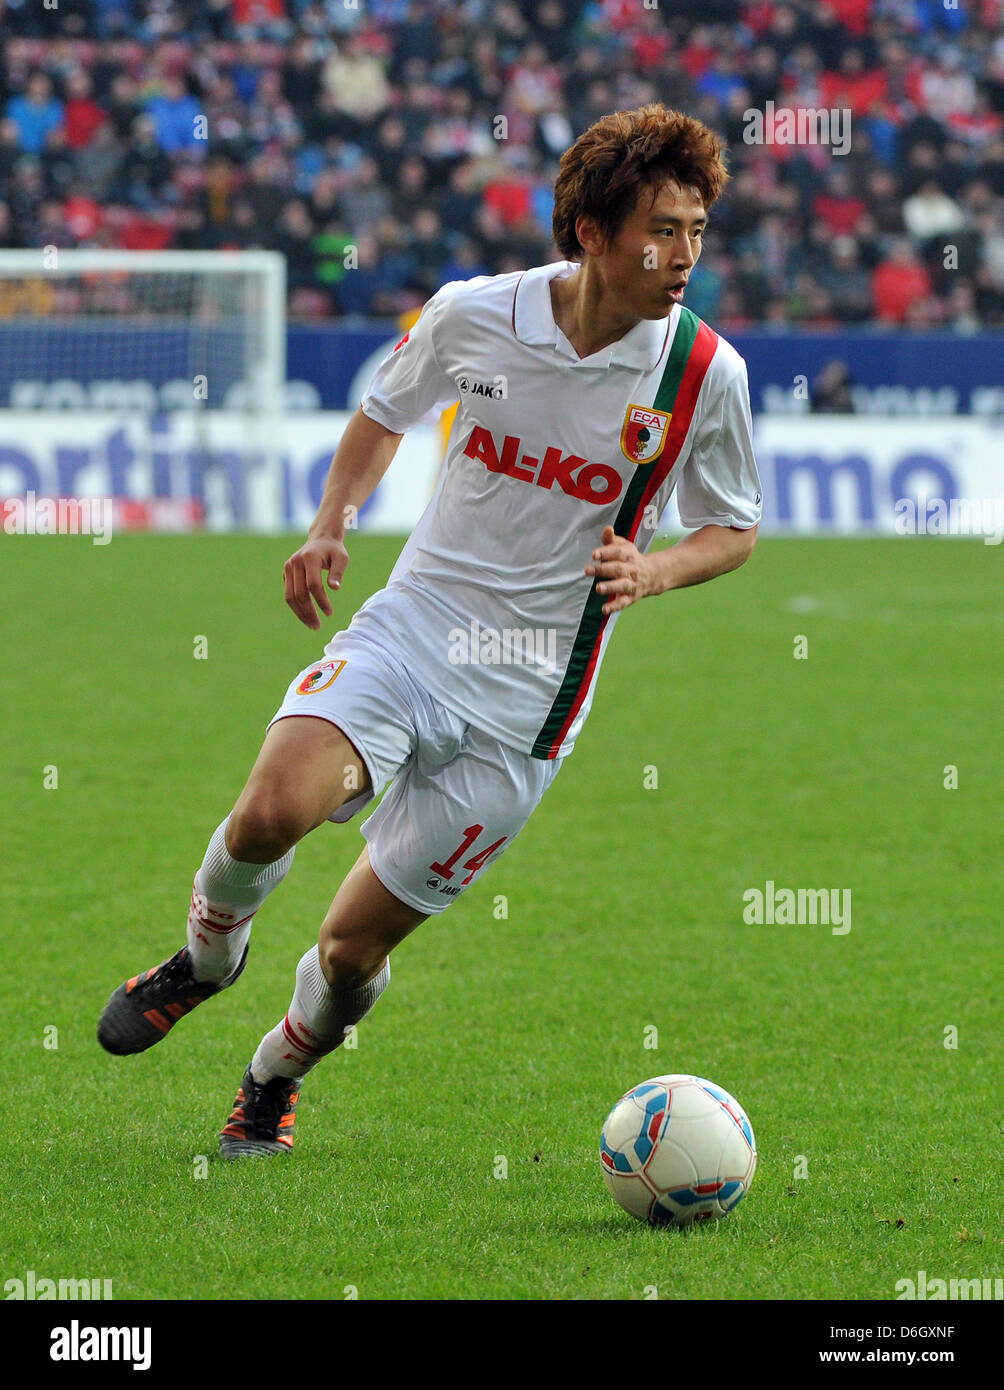 Augsburg's Ja-Cheol Koo in action with the ball during the Bundesliga soccer match between FC Augsburg and Hertha BSC at the SGL-Arena in Augsburg, Germany, 25 February 2012.  Augsburg won the match 3-0. Photo: Stefan Puchner Stock Photo